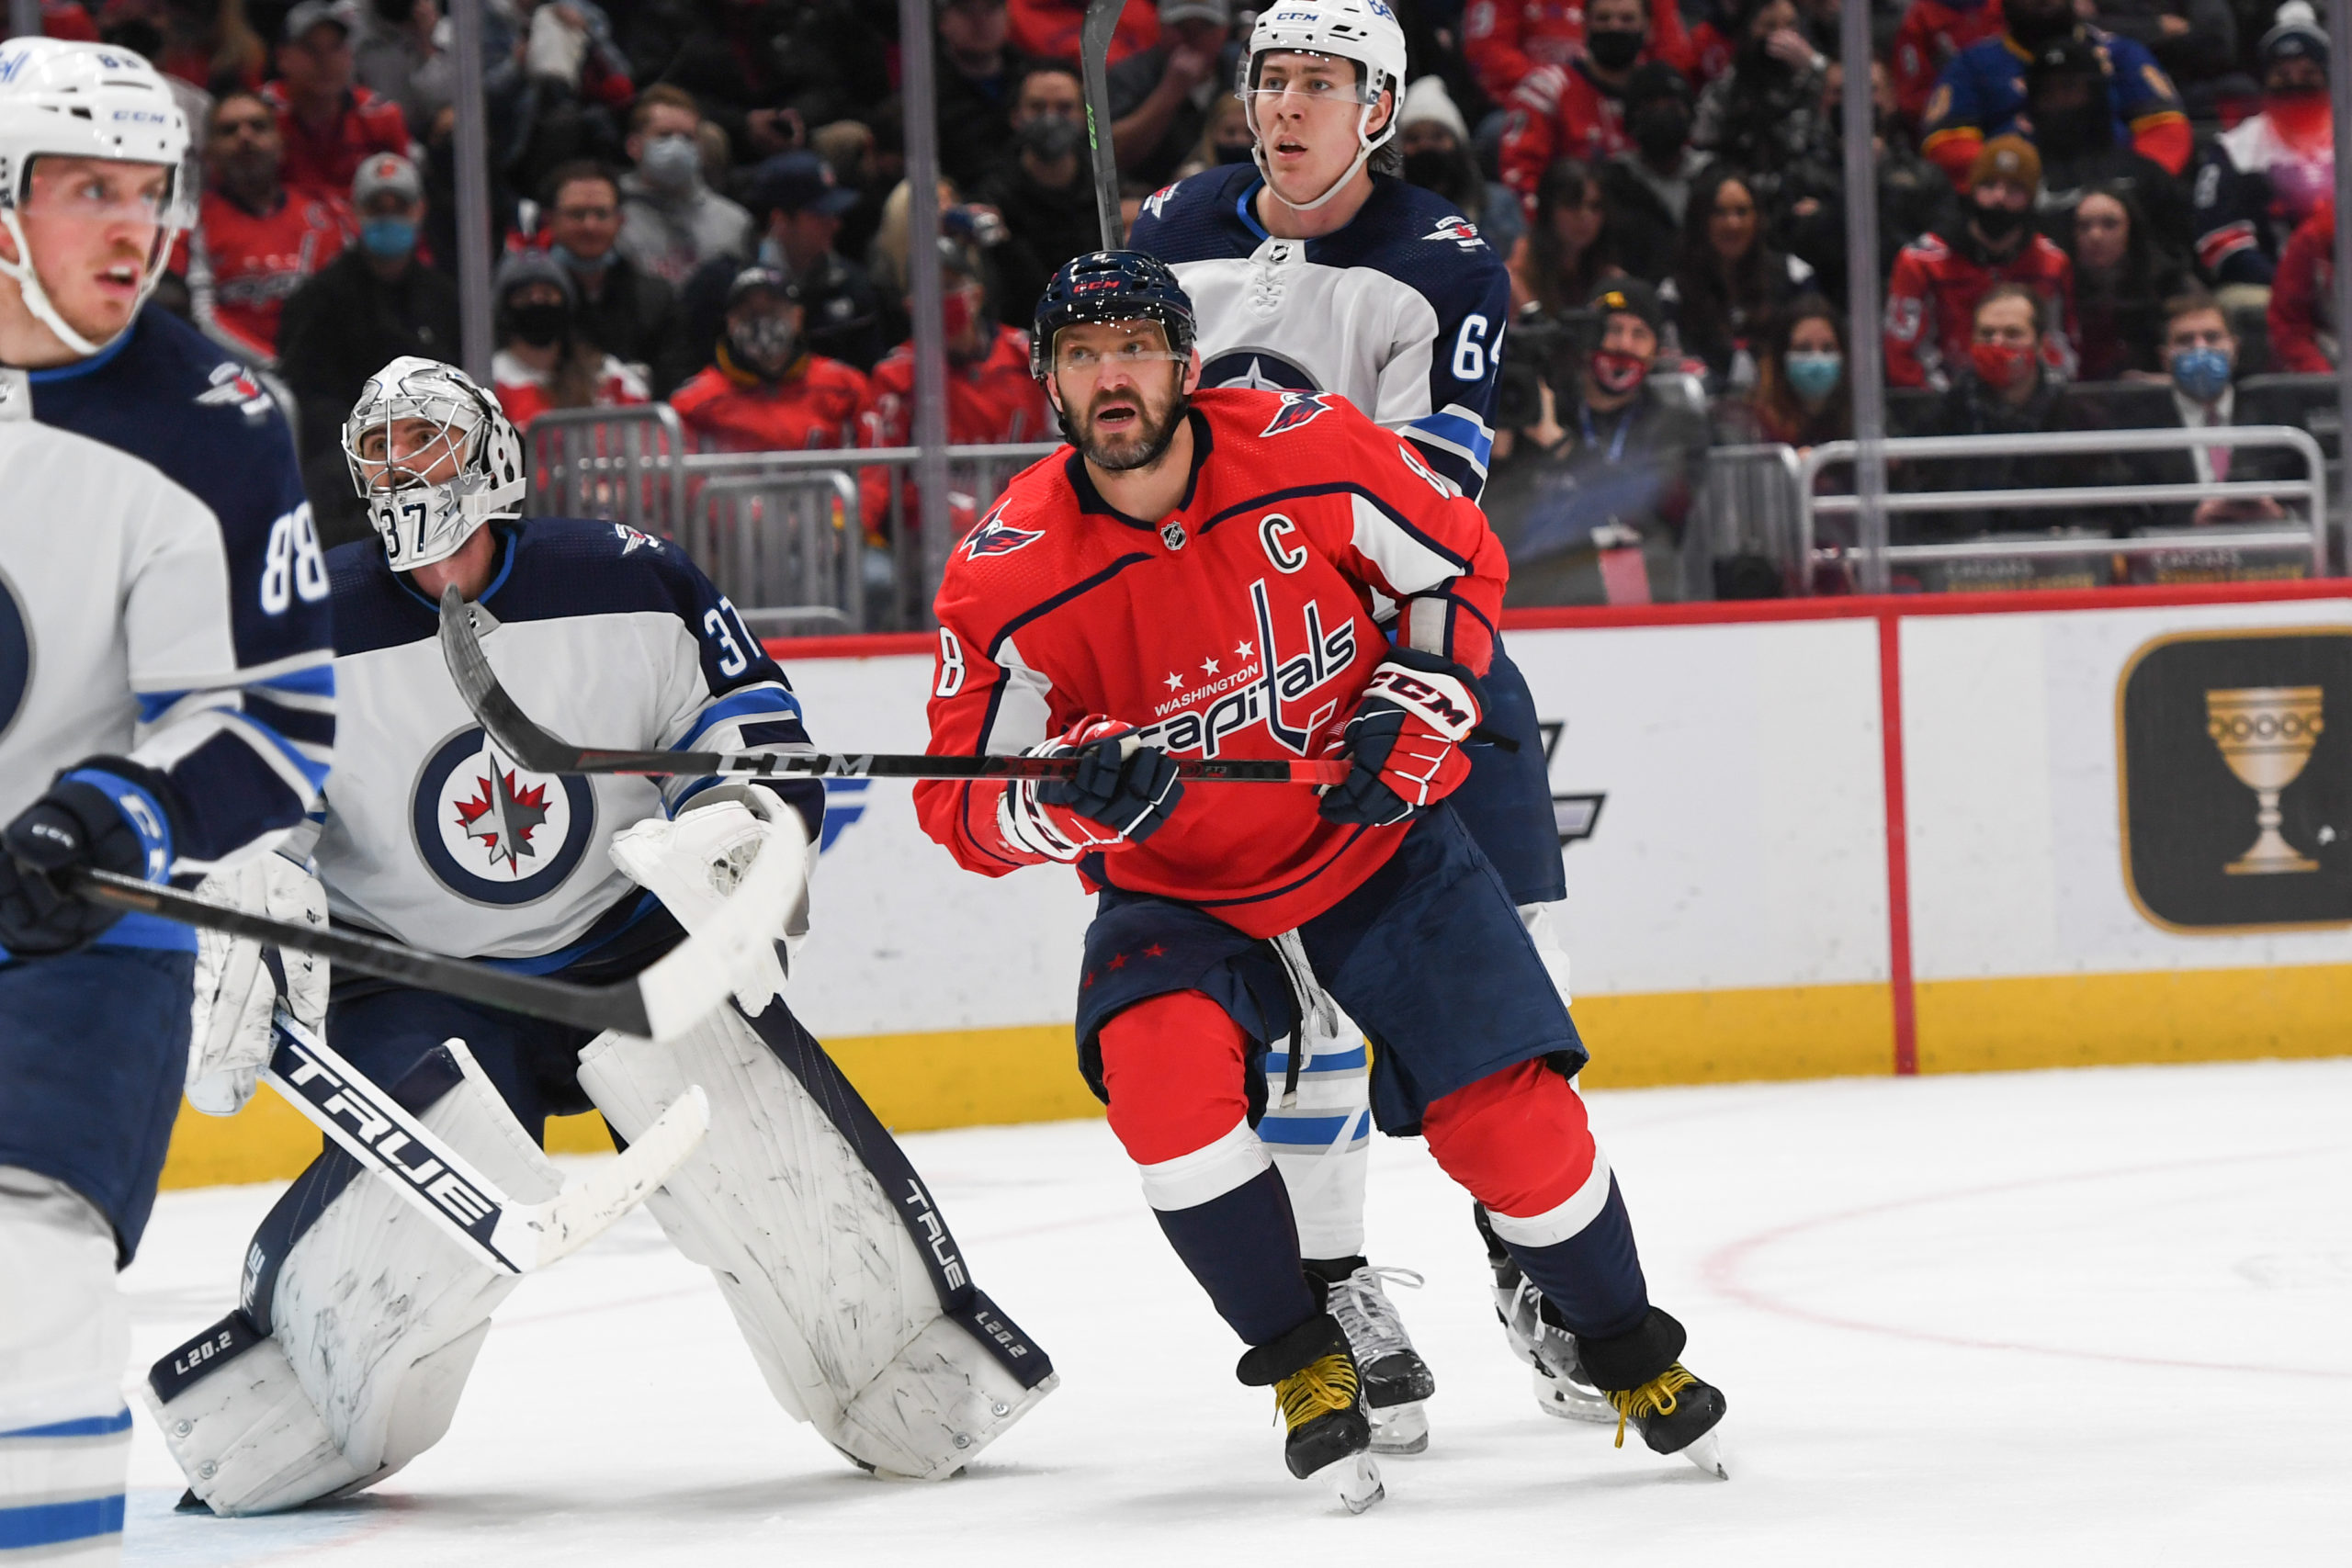 Capitals vs. Jets: Tale Of The Tape, Lines, Players To Watch